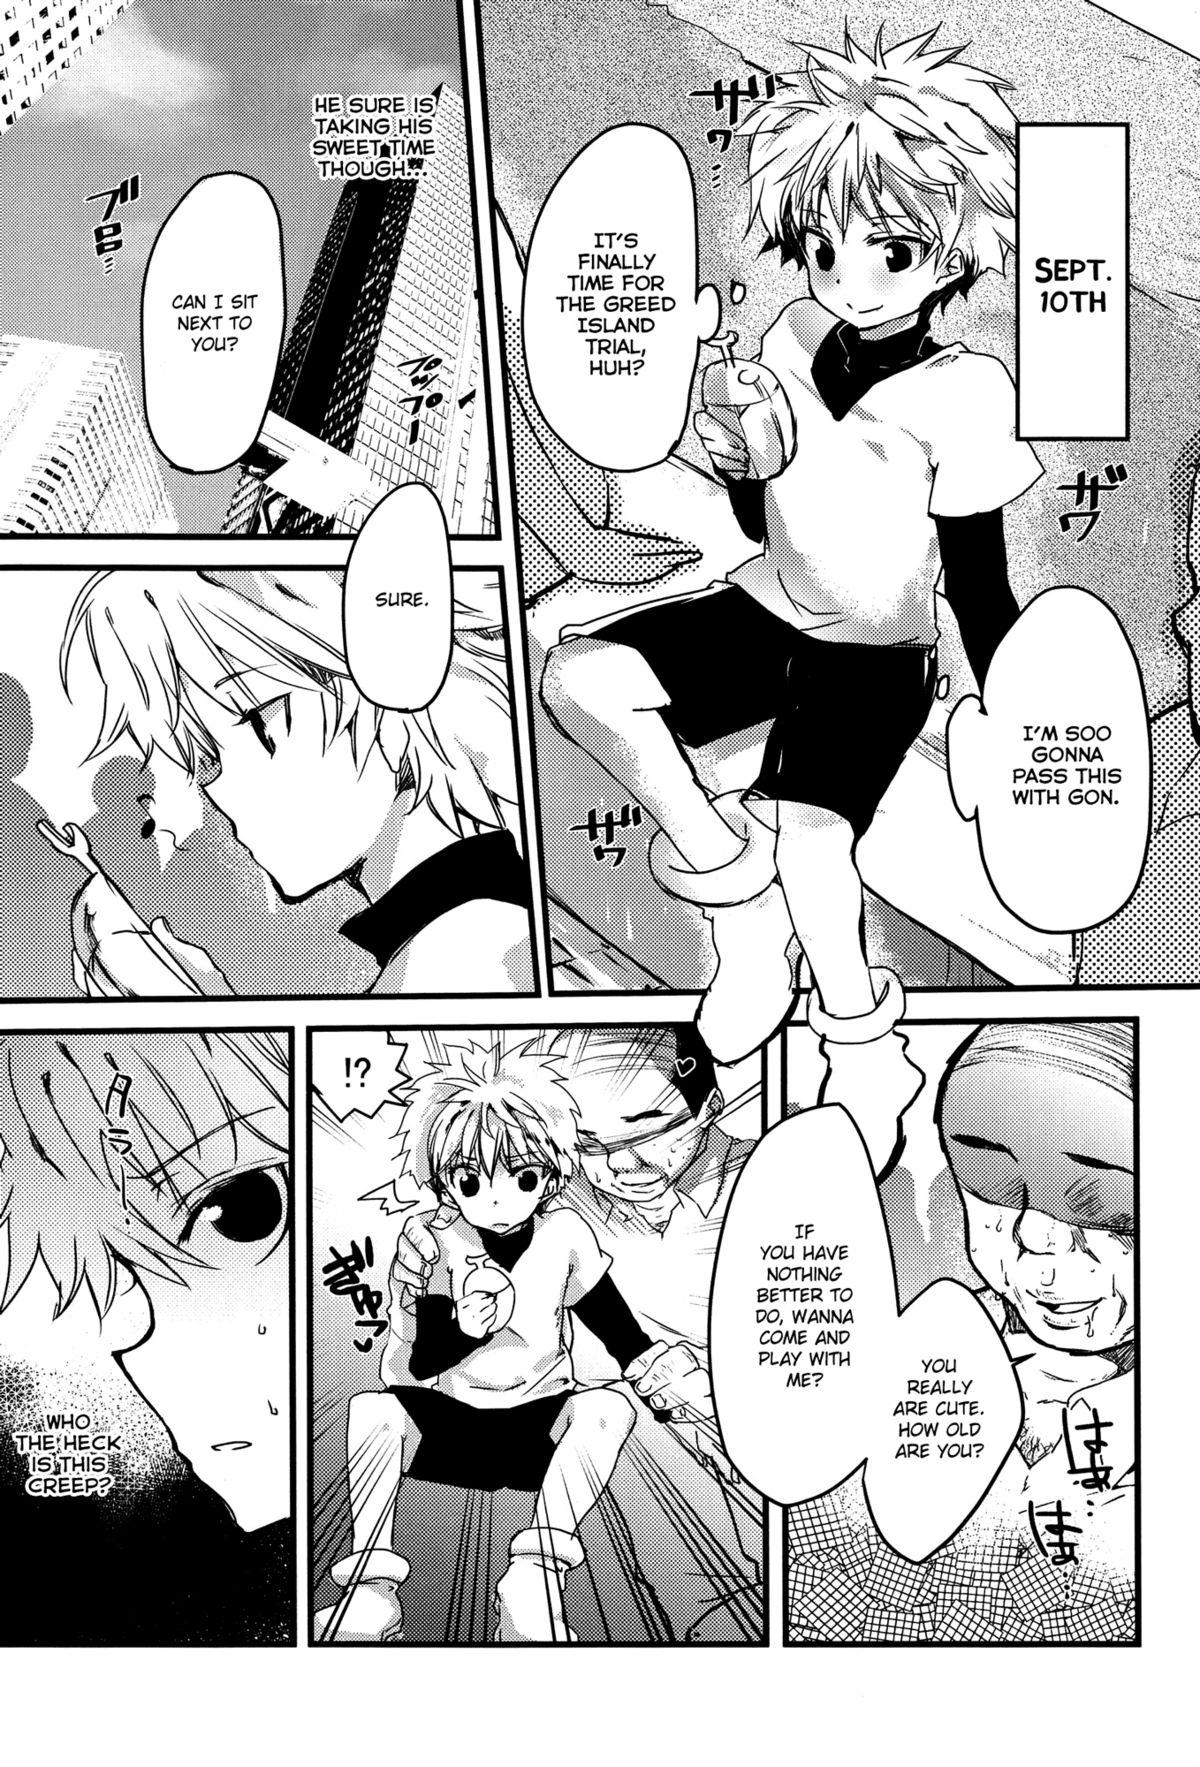 Butts Ojisan no Koibito | A Middle-aged Man's Sweetheart - Hunter x hunter Camsex - Page 4